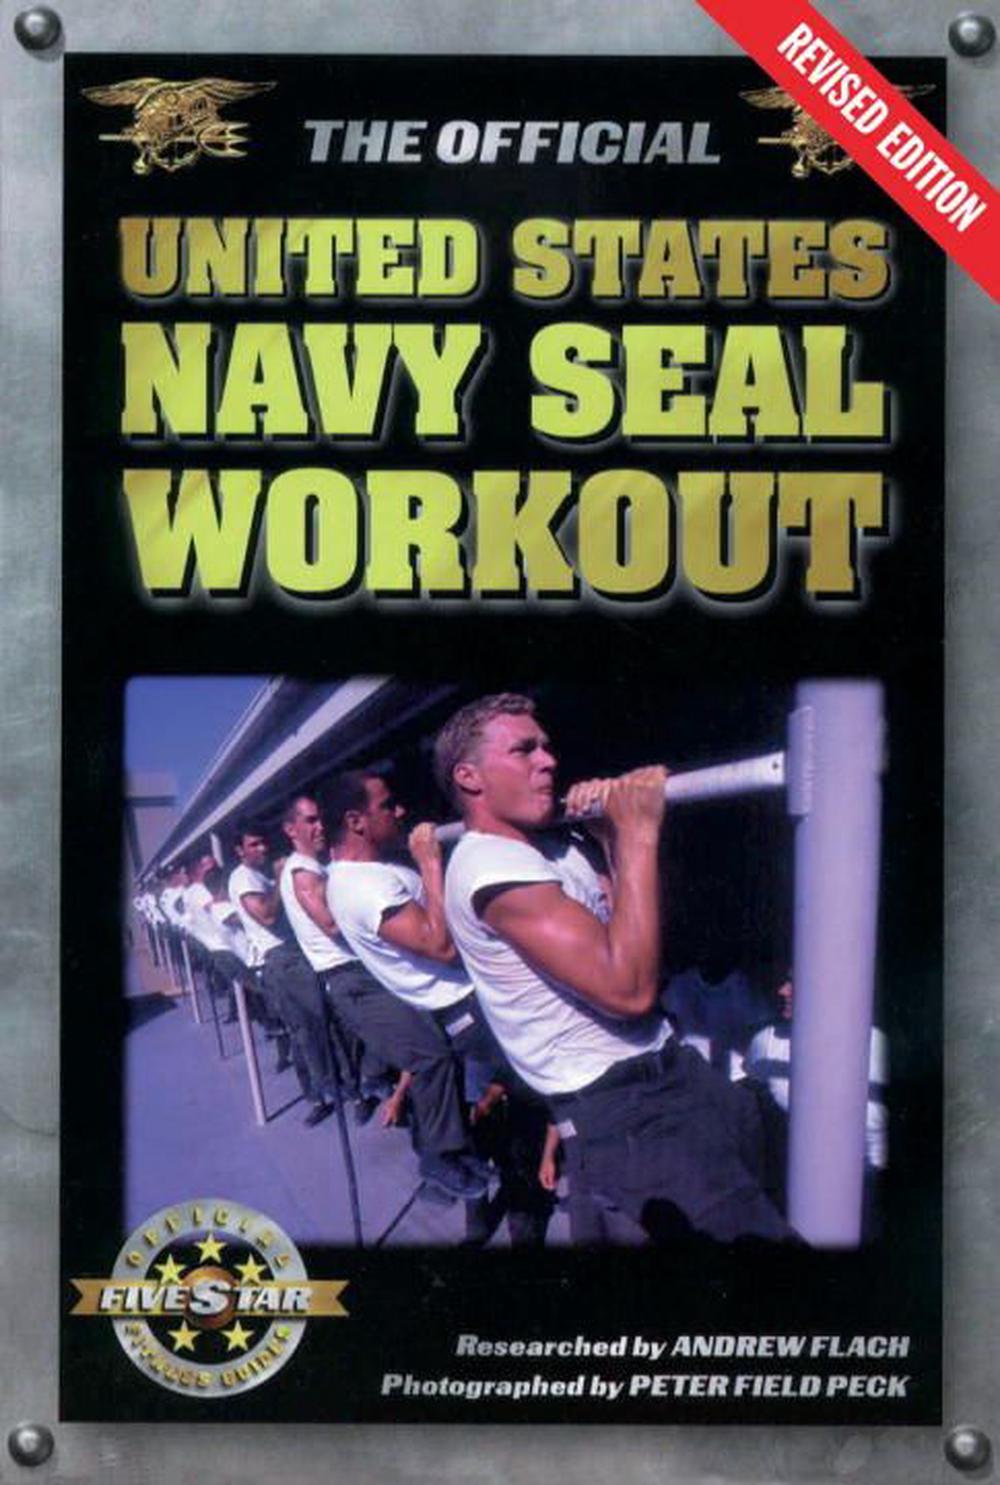 10 Minute Official united states navy seal workout for Women